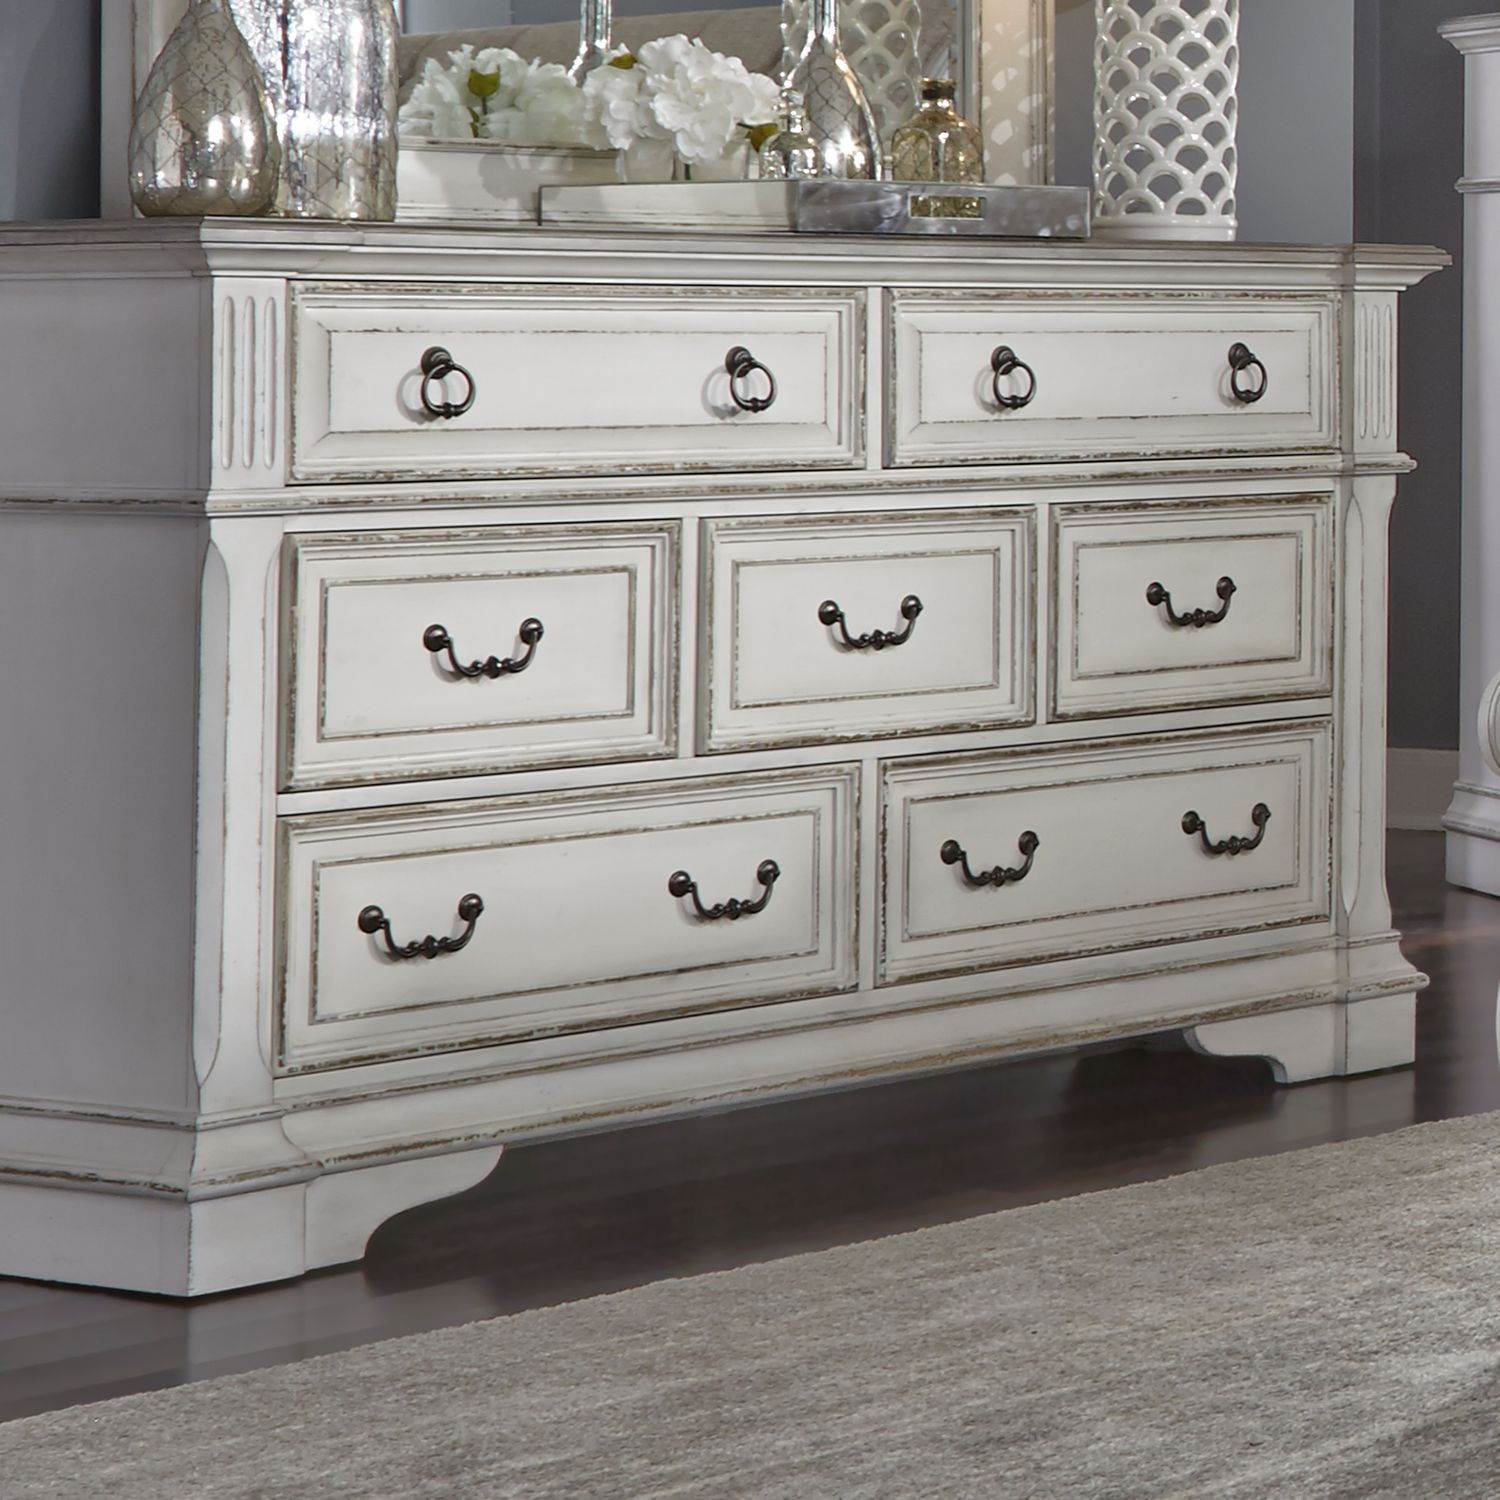 Abbey Park 520-BR Panel Bedroom Collection from Liberty Furniture